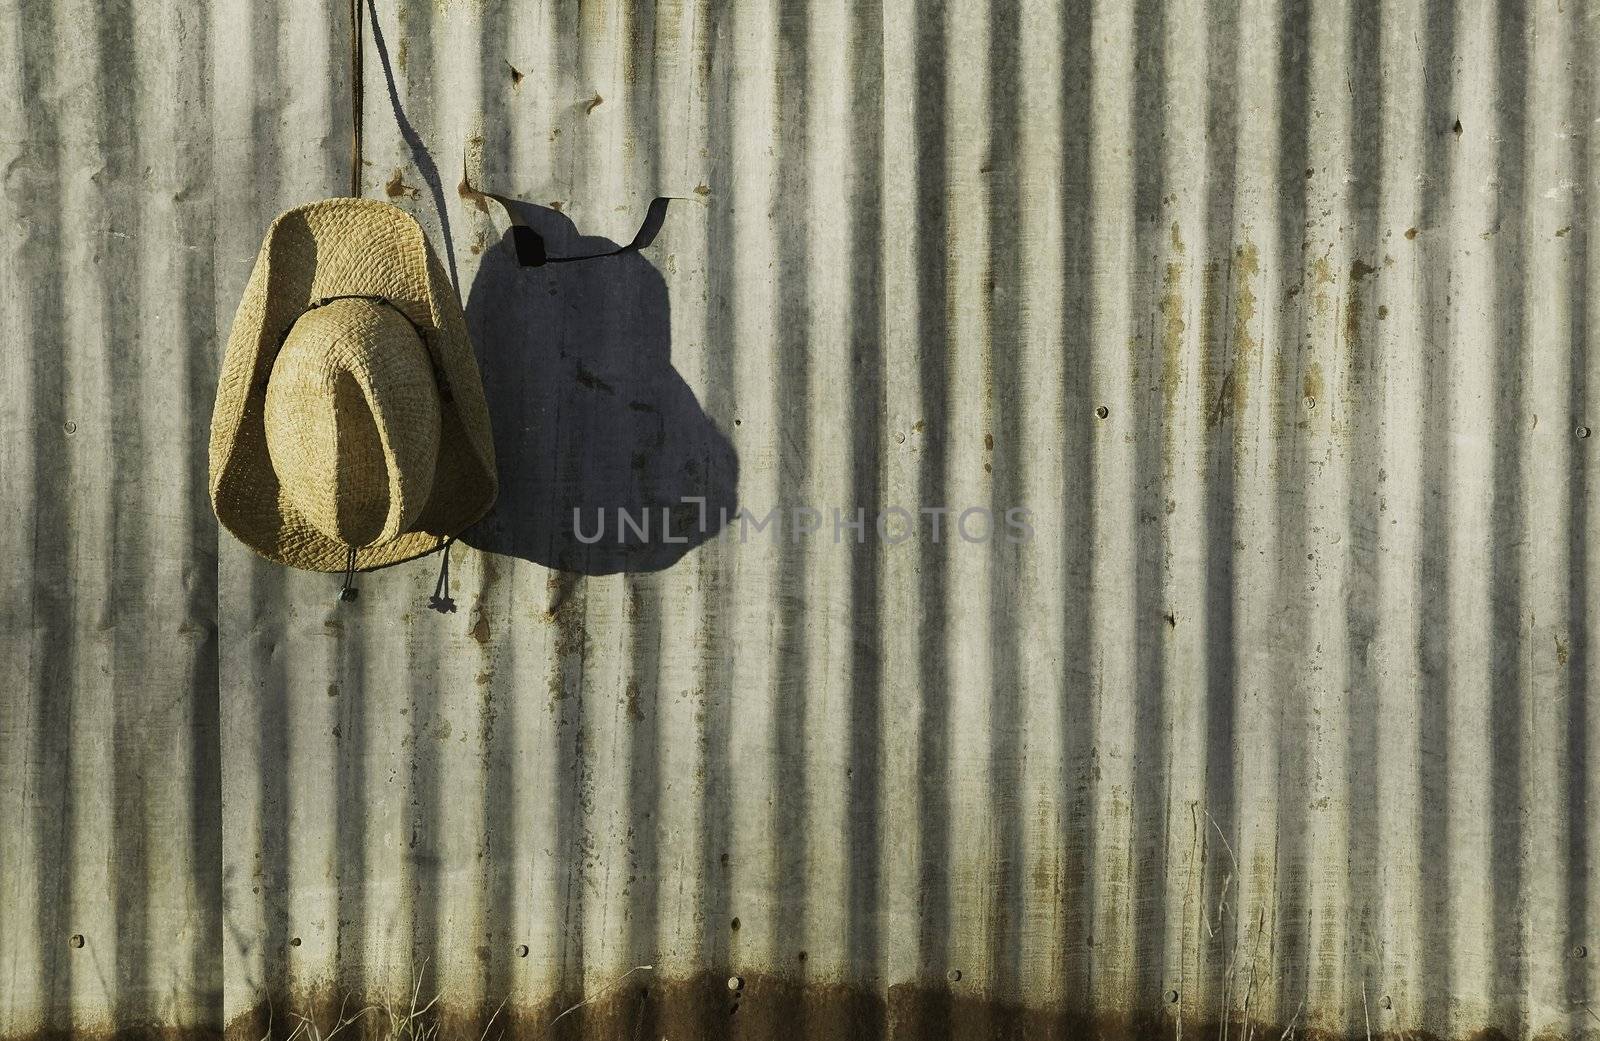 Straw cowboy hat hanging in front of old corrugated metal.